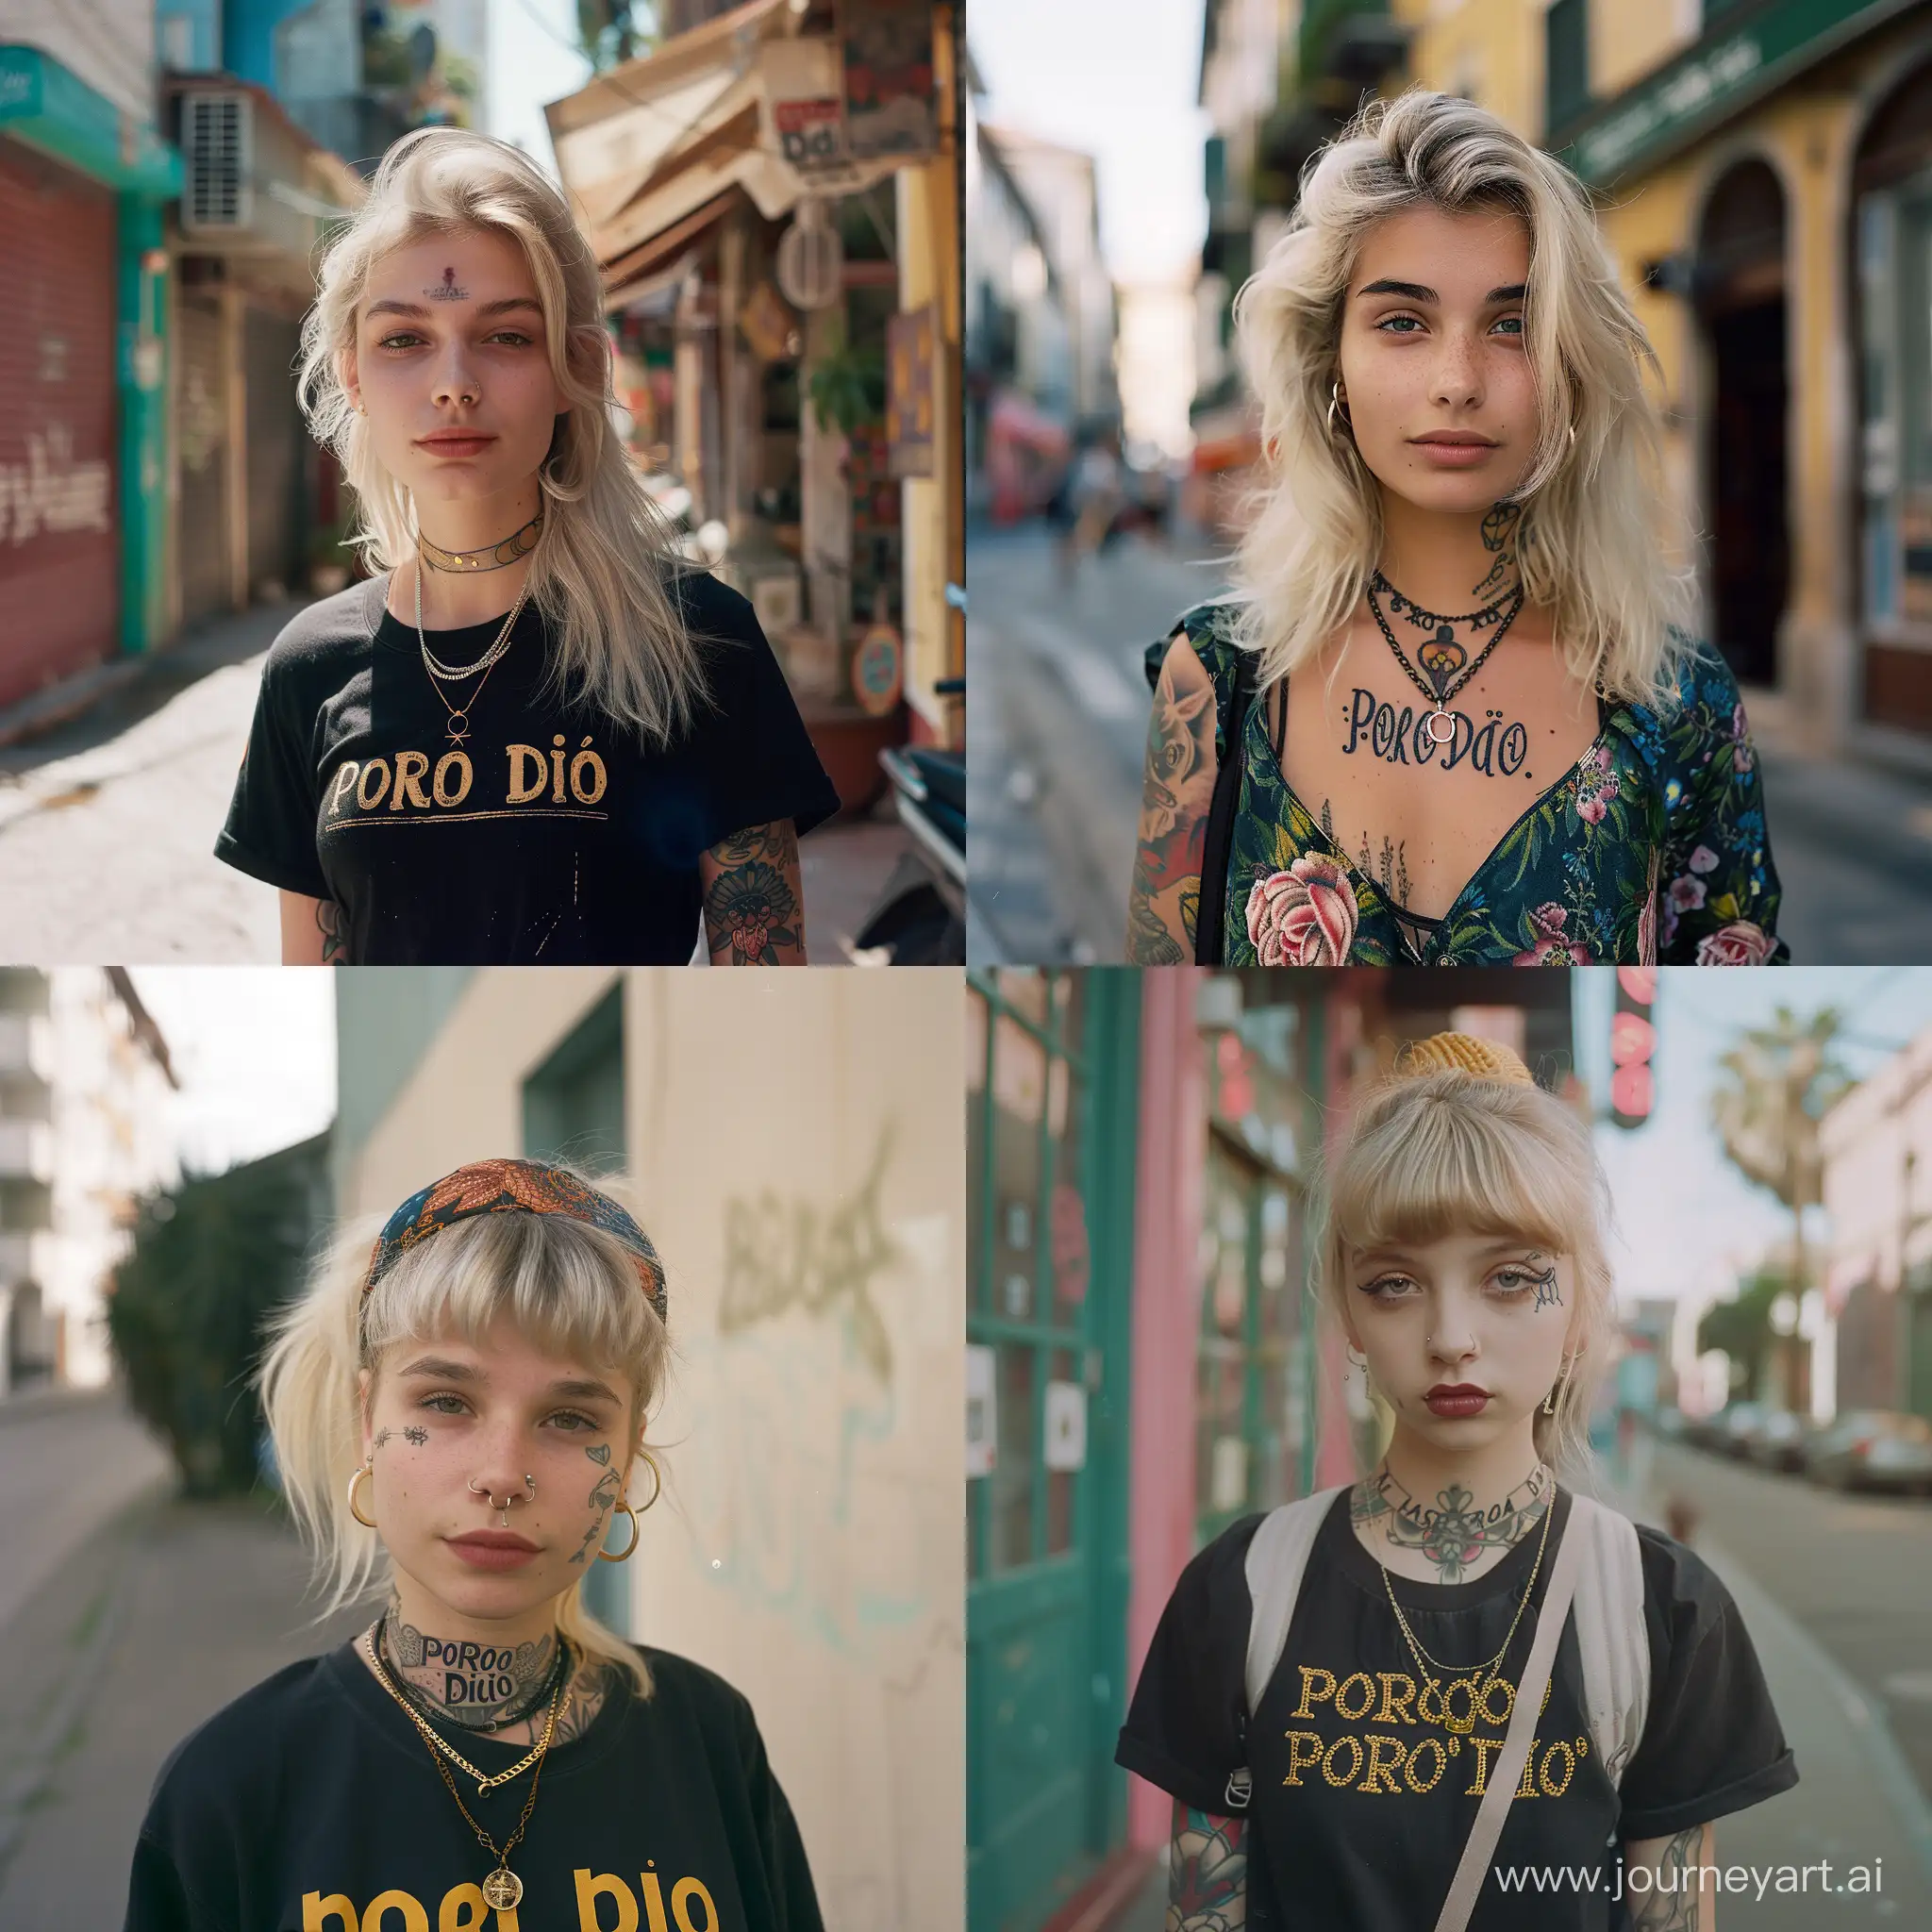 Bohemian-Blonde-Woman-with-Porco-Dio-Tattoo-in-Candid-Street-Capture